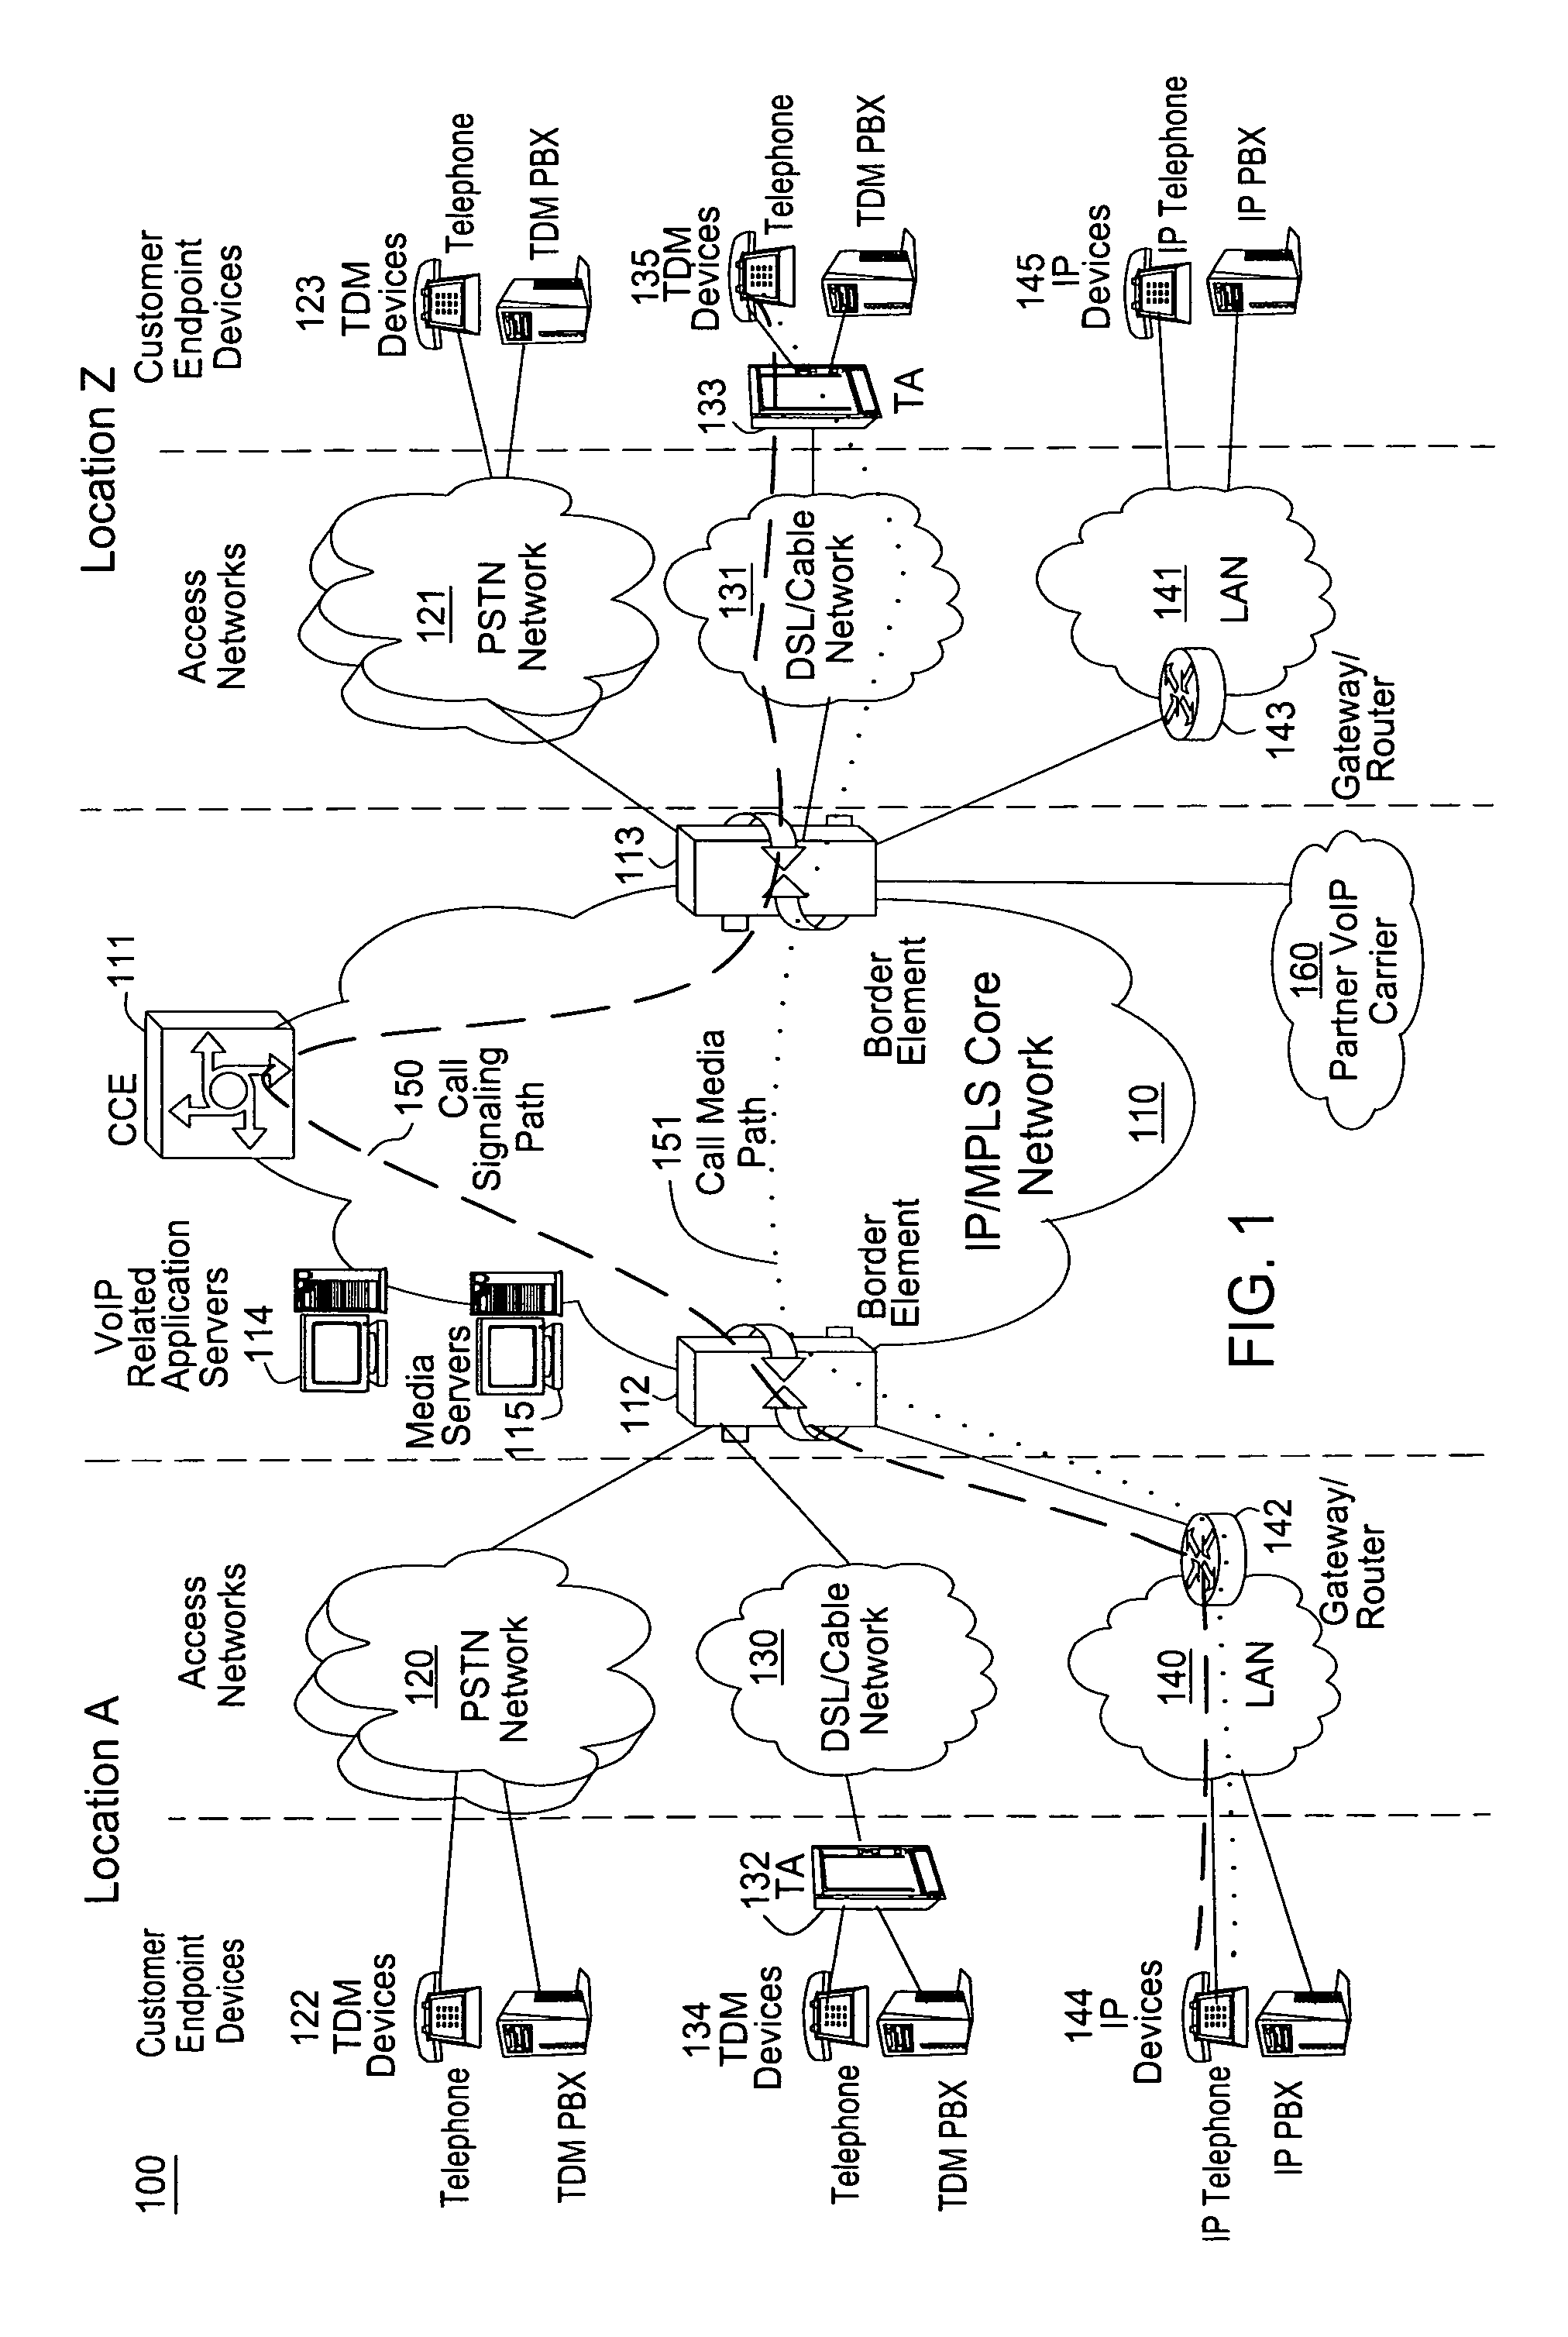 Method and apparatus for providing a reliable voice extensible markup language service